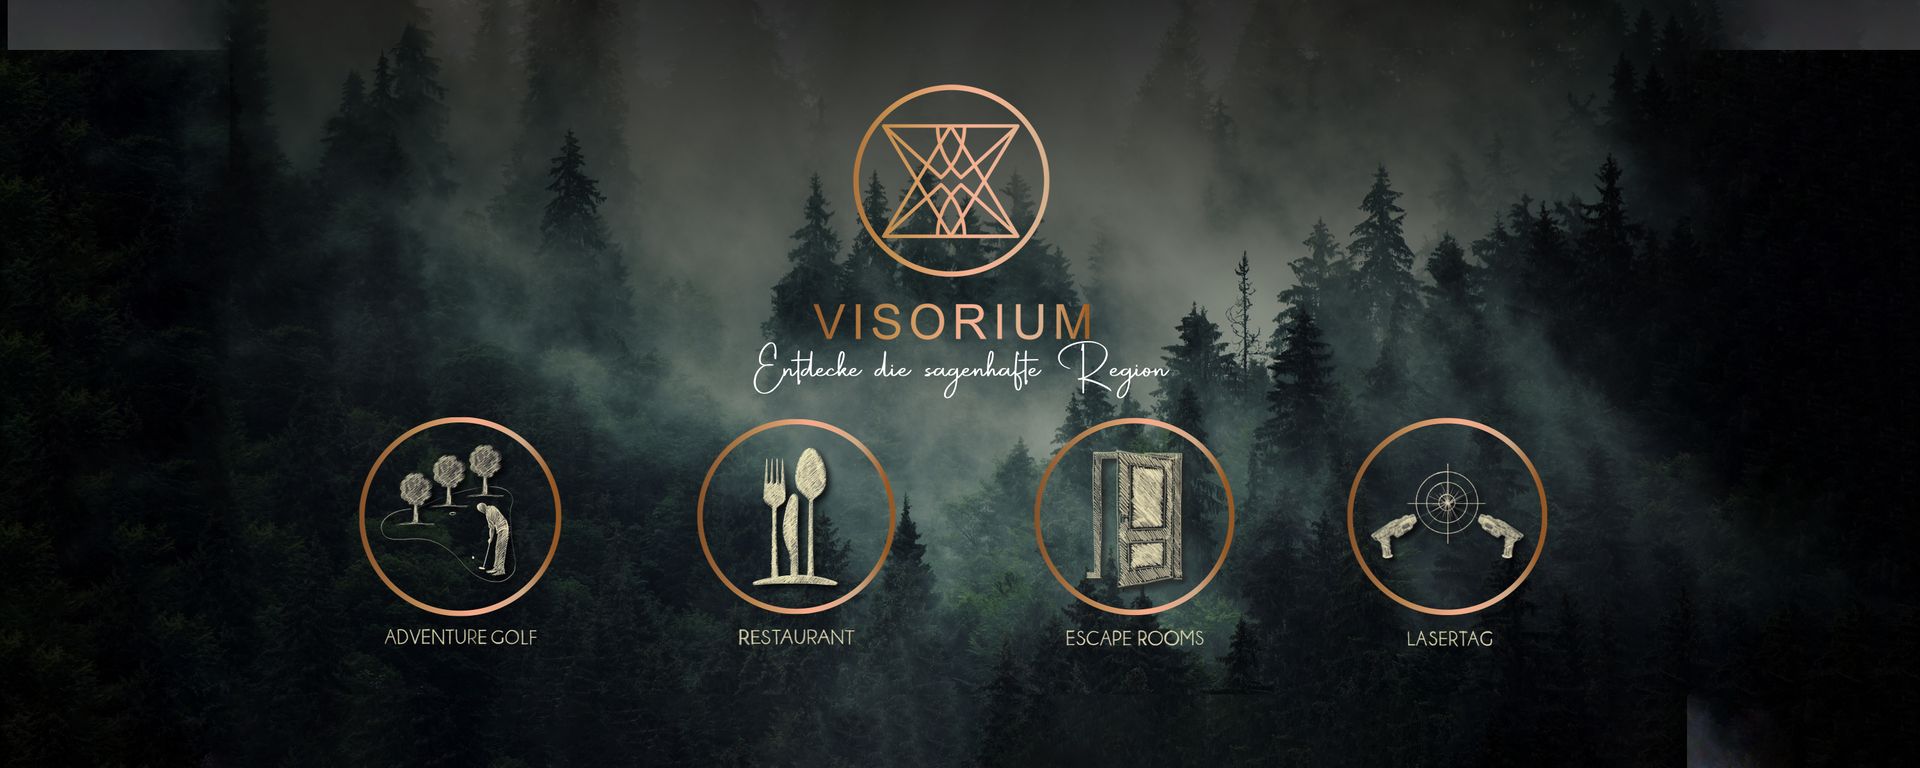 Receive discounts on experiences in the Visorium when booking at a partner hotel